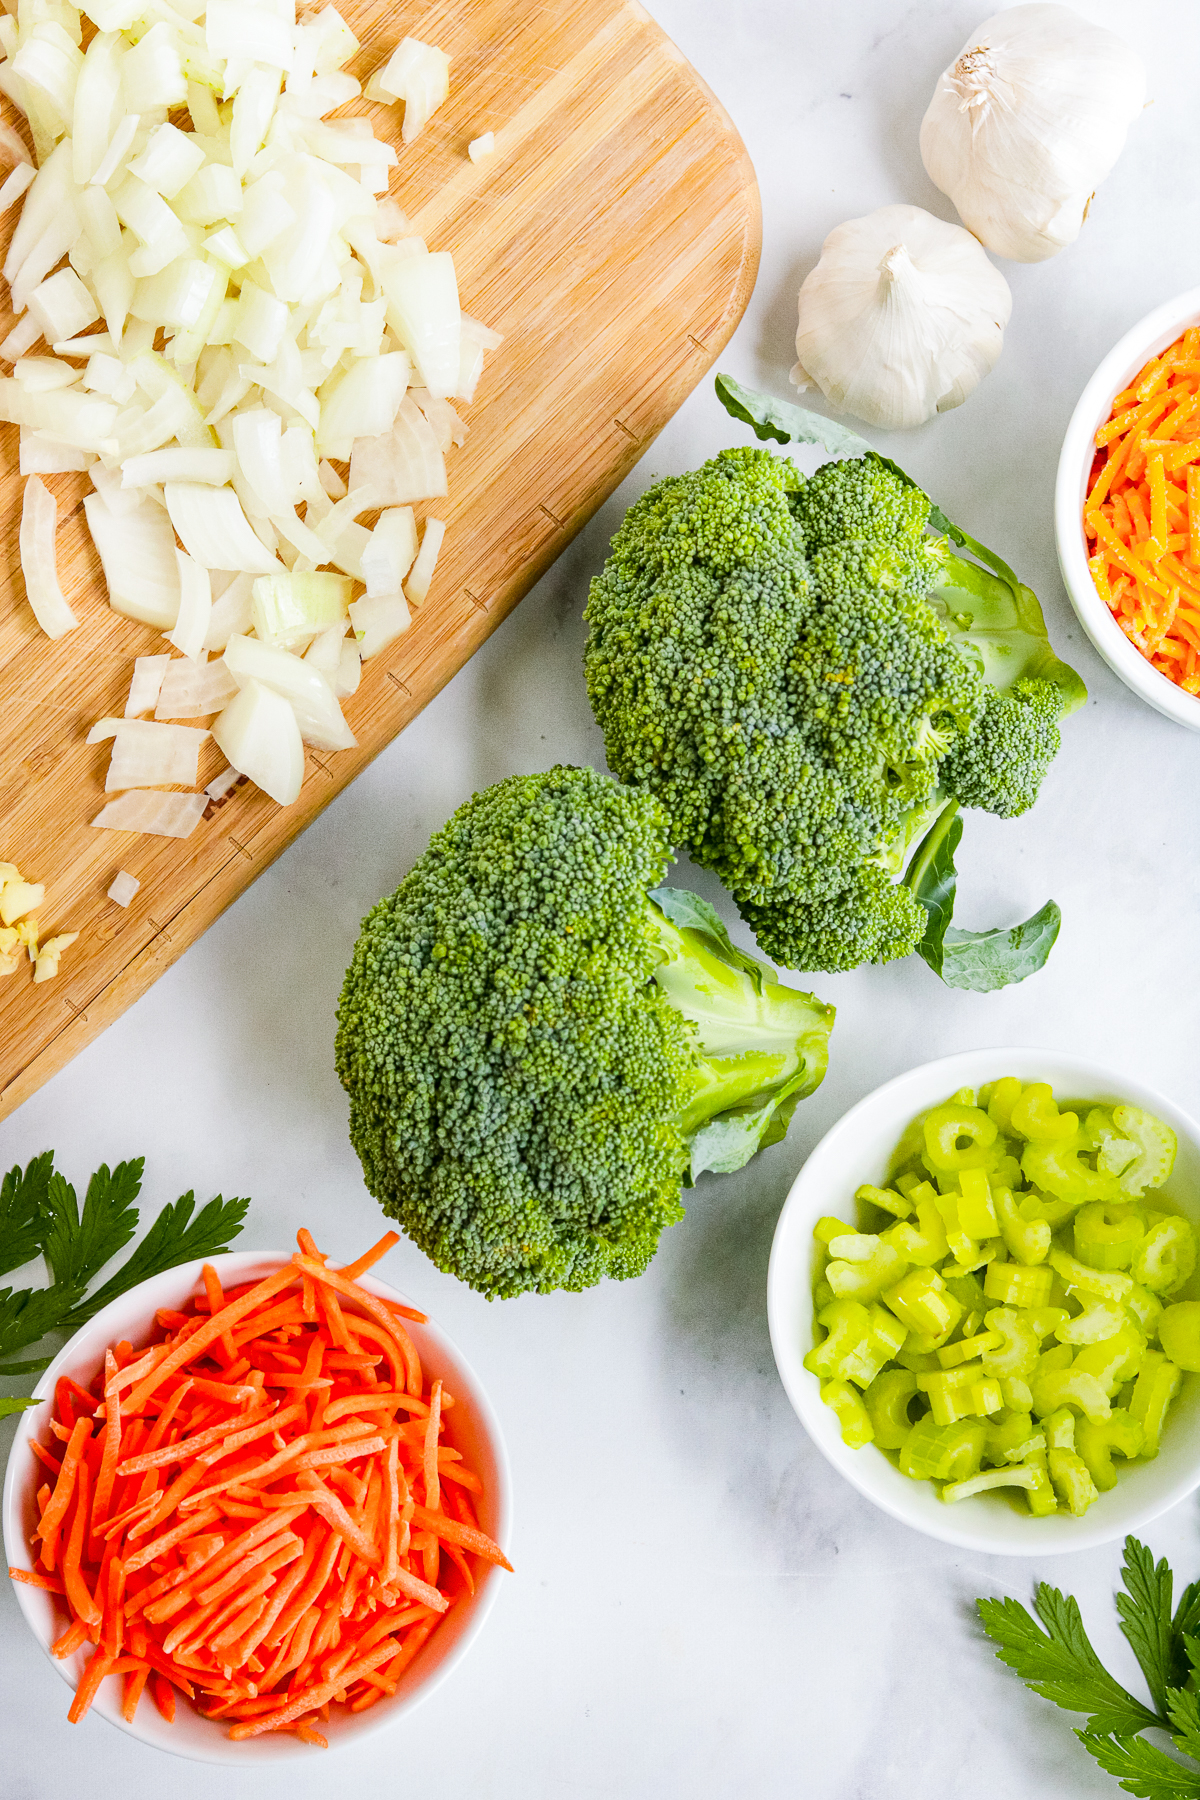 Ingredients needed to make a Broccoli Cheddar Soup Recipe